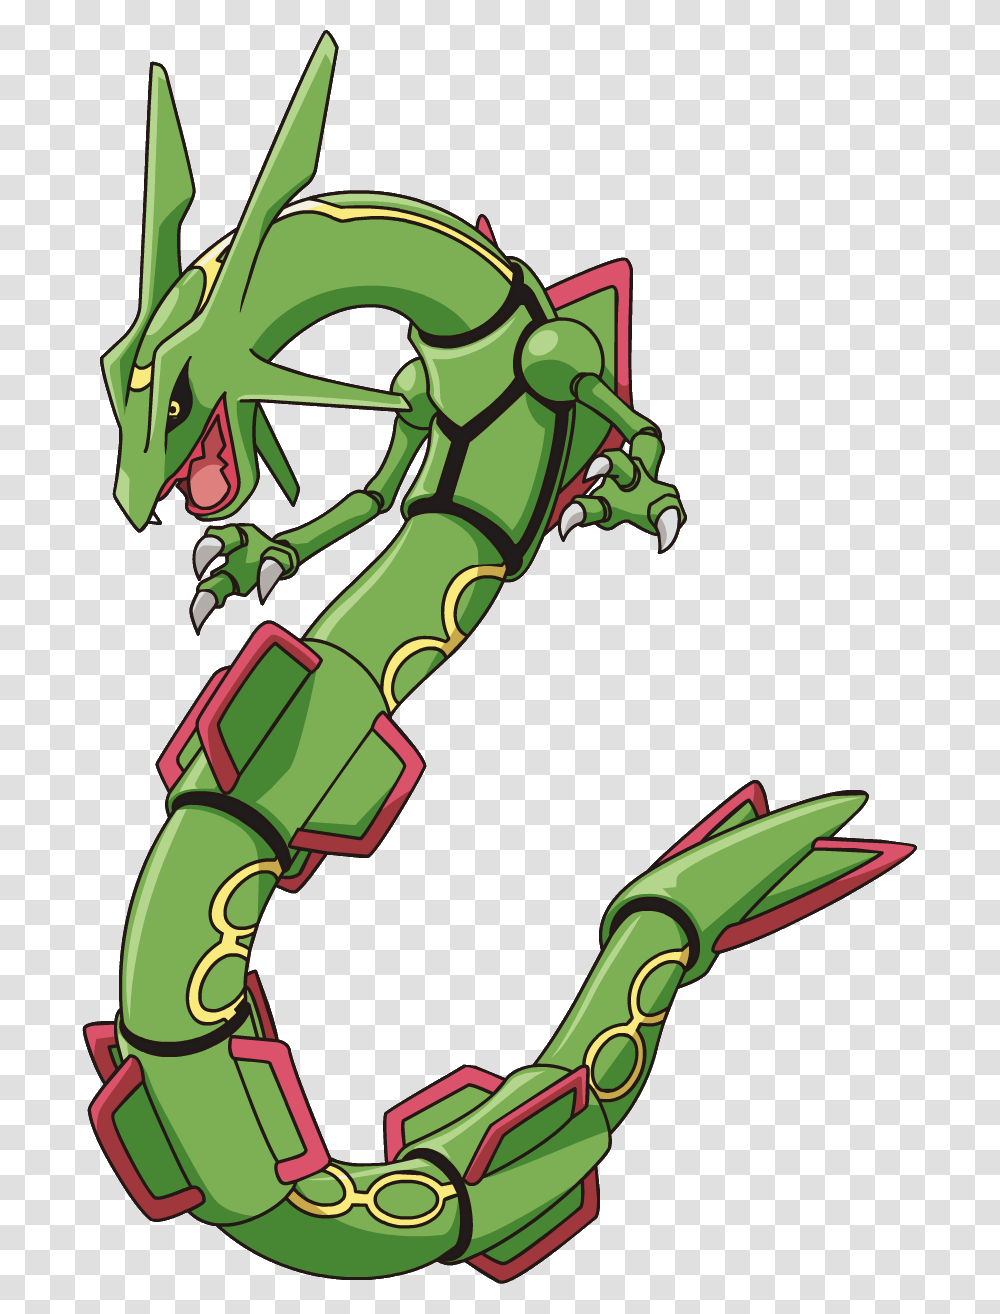 Rayquaza Wiki Fandom Powered, Green, Plant, Produce, Food Transparent Png